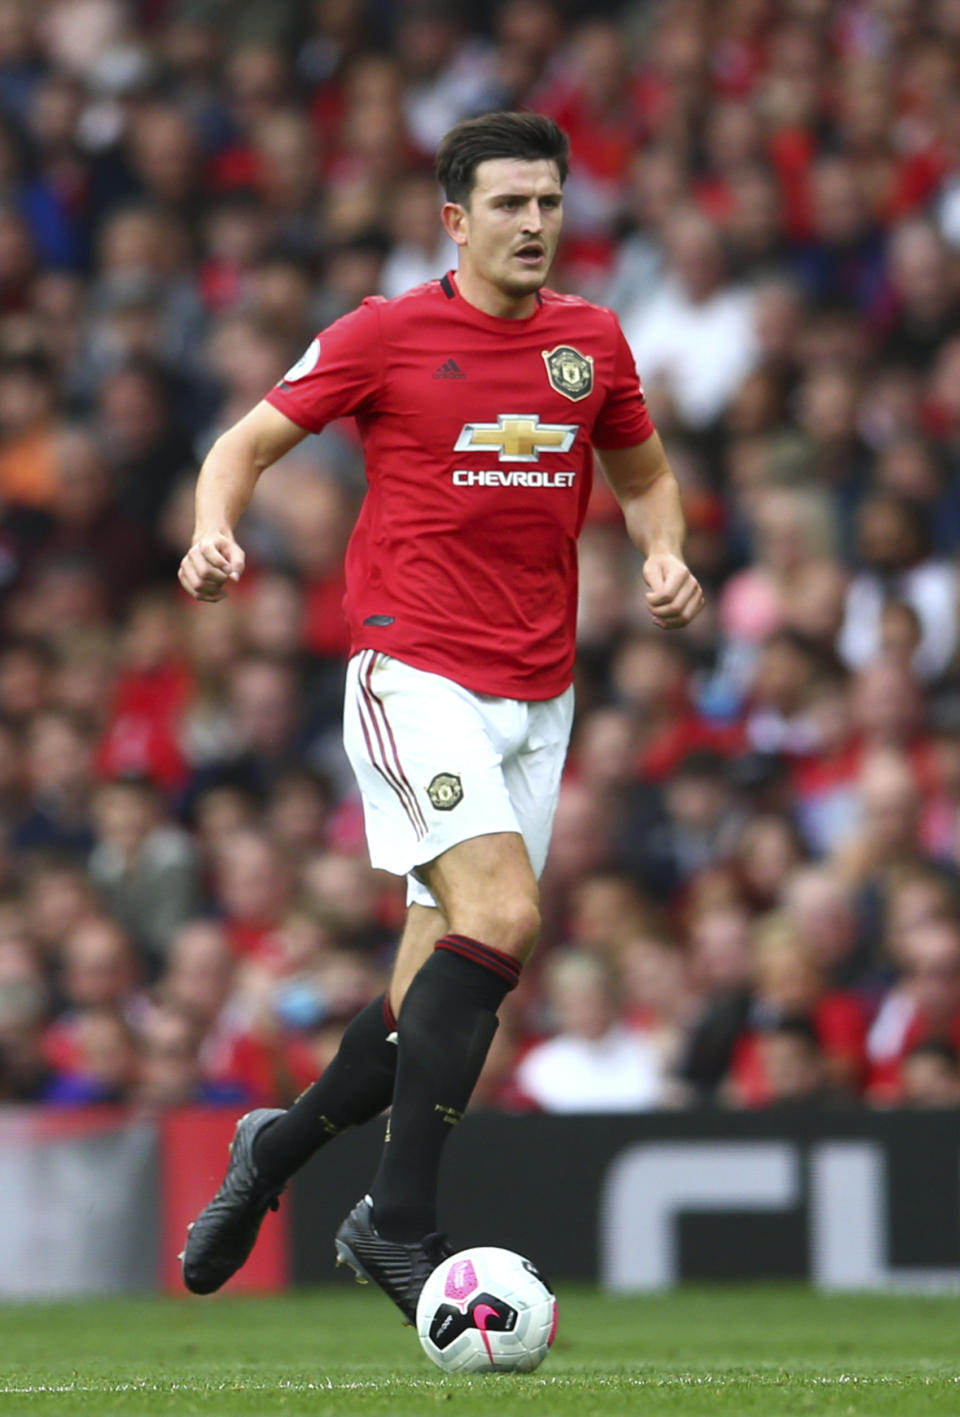 Manchester United's Harry Maguire controls the ball during the English Premier League soccer match between Manchester United and Chelsea at Old Trafford in Manchester, England, Sunday, Aug. 11, 2019. (AP Photo/Dave Thompson)